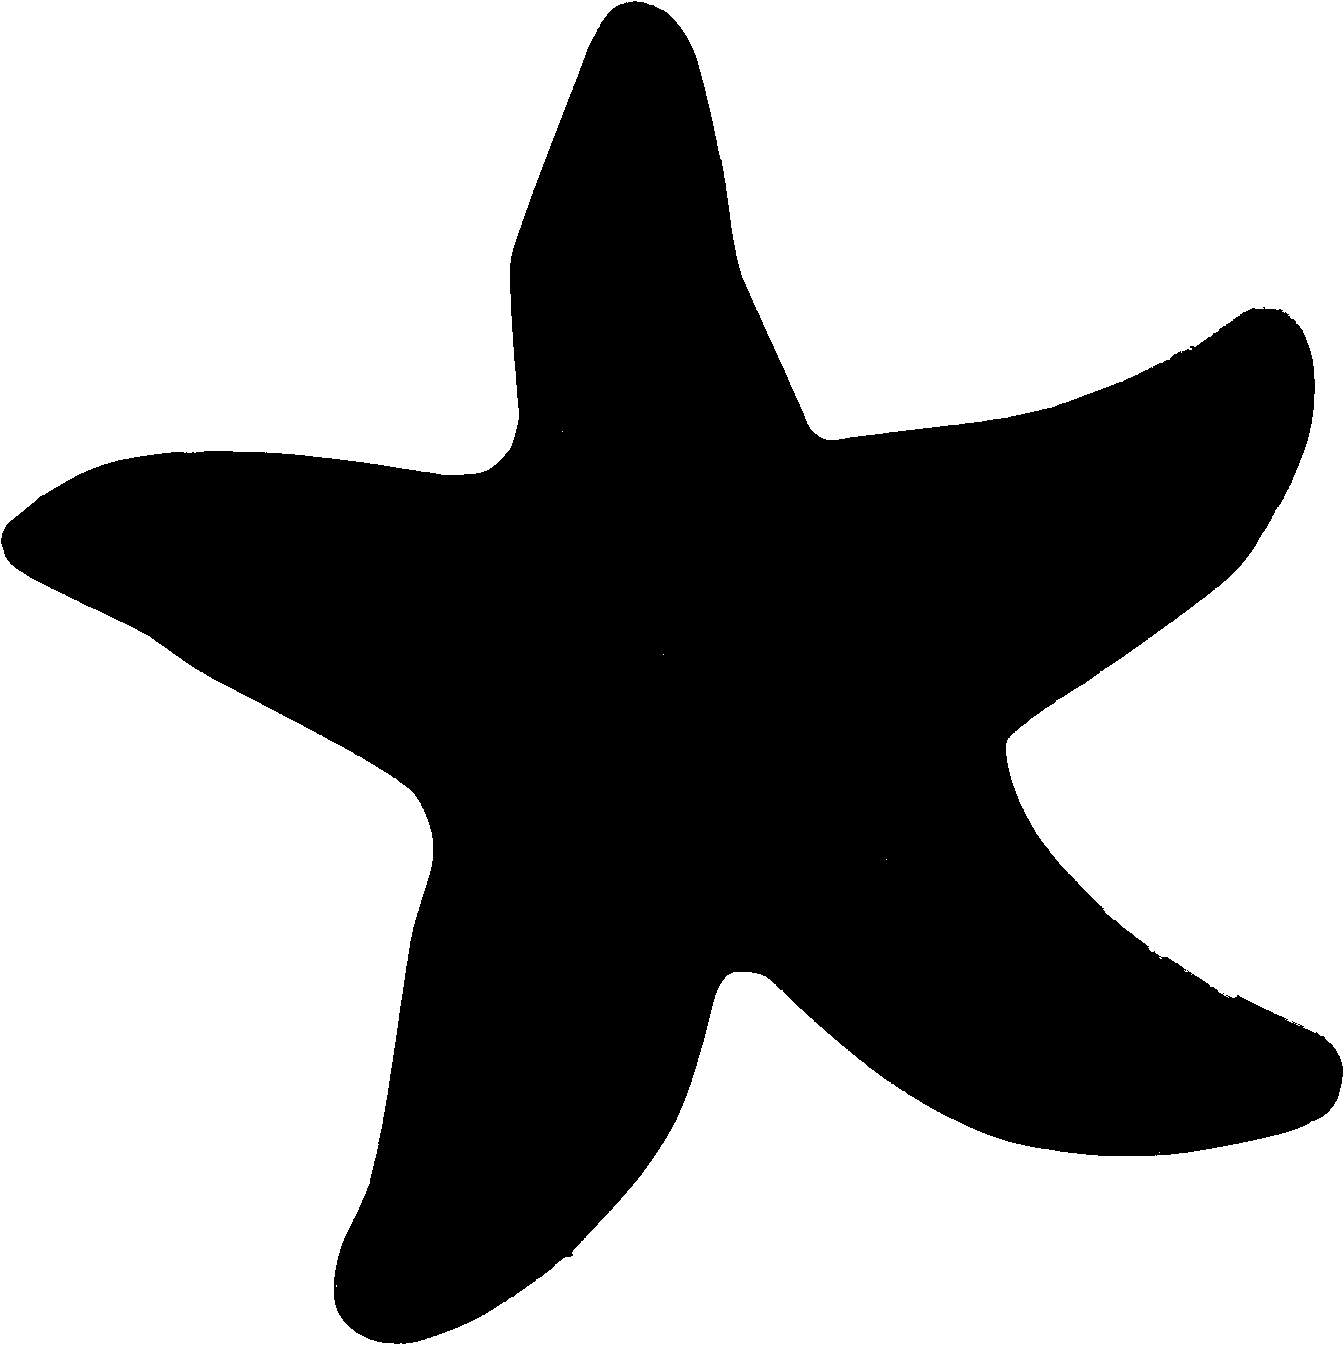 Star Fish Outline - ClipArt Best